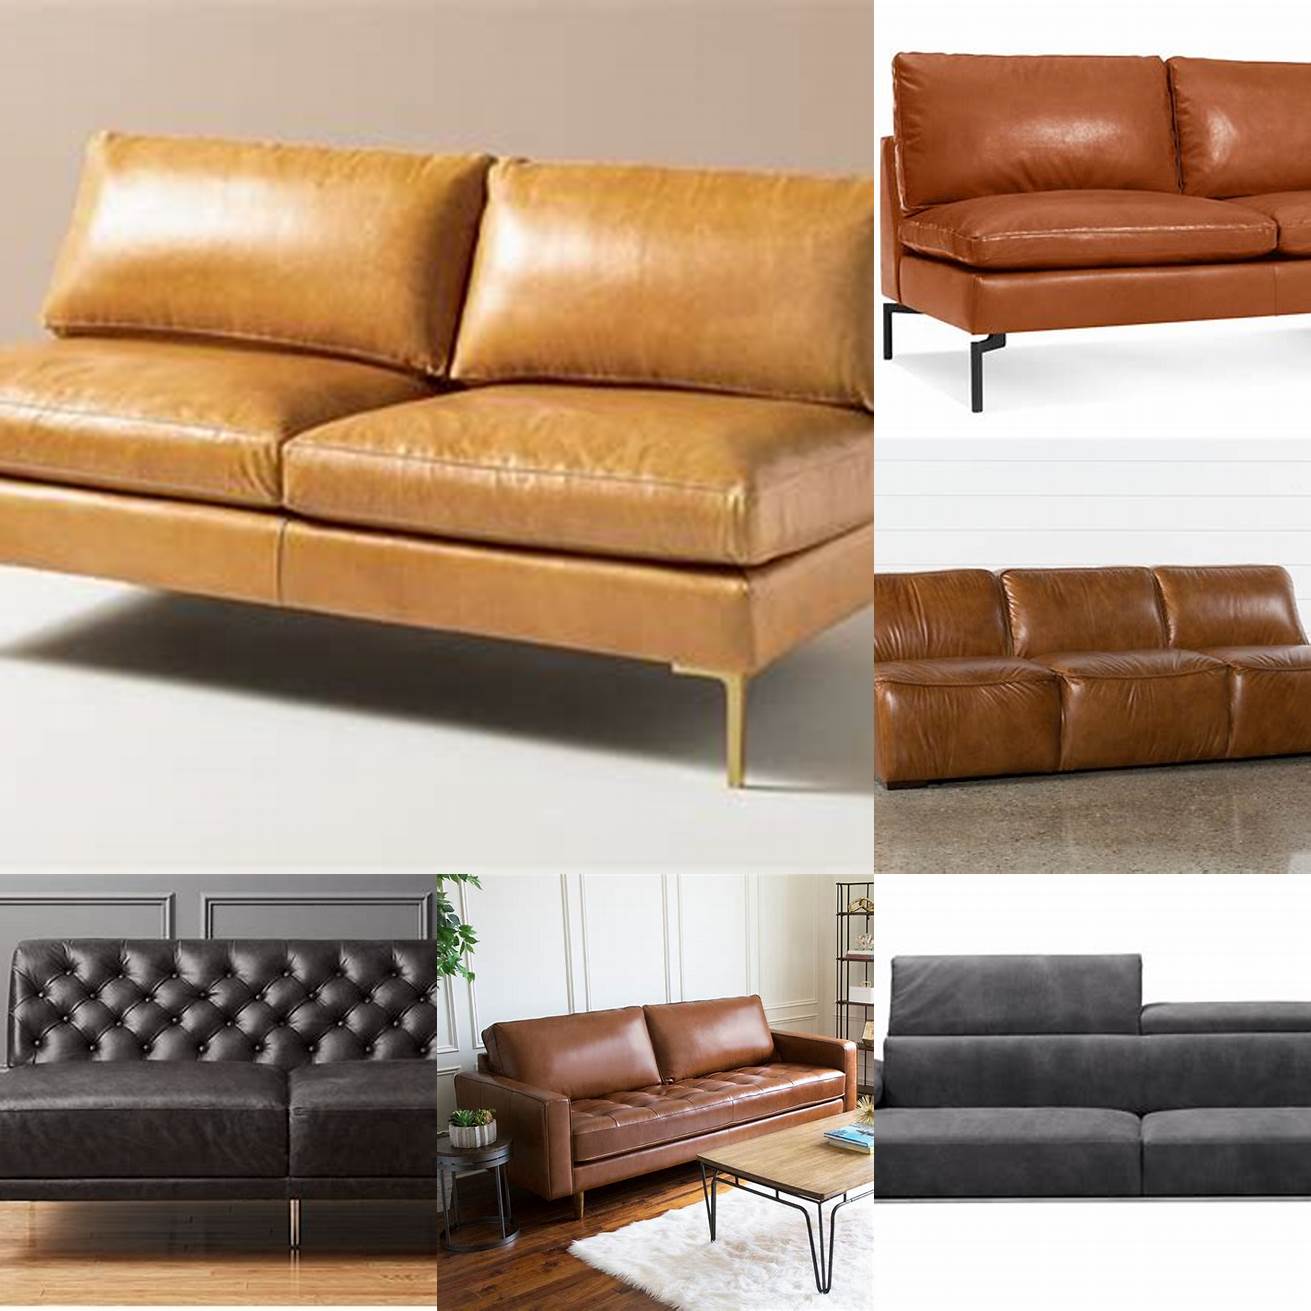 A leather armless sofa adds a touch of sophistication to any living space